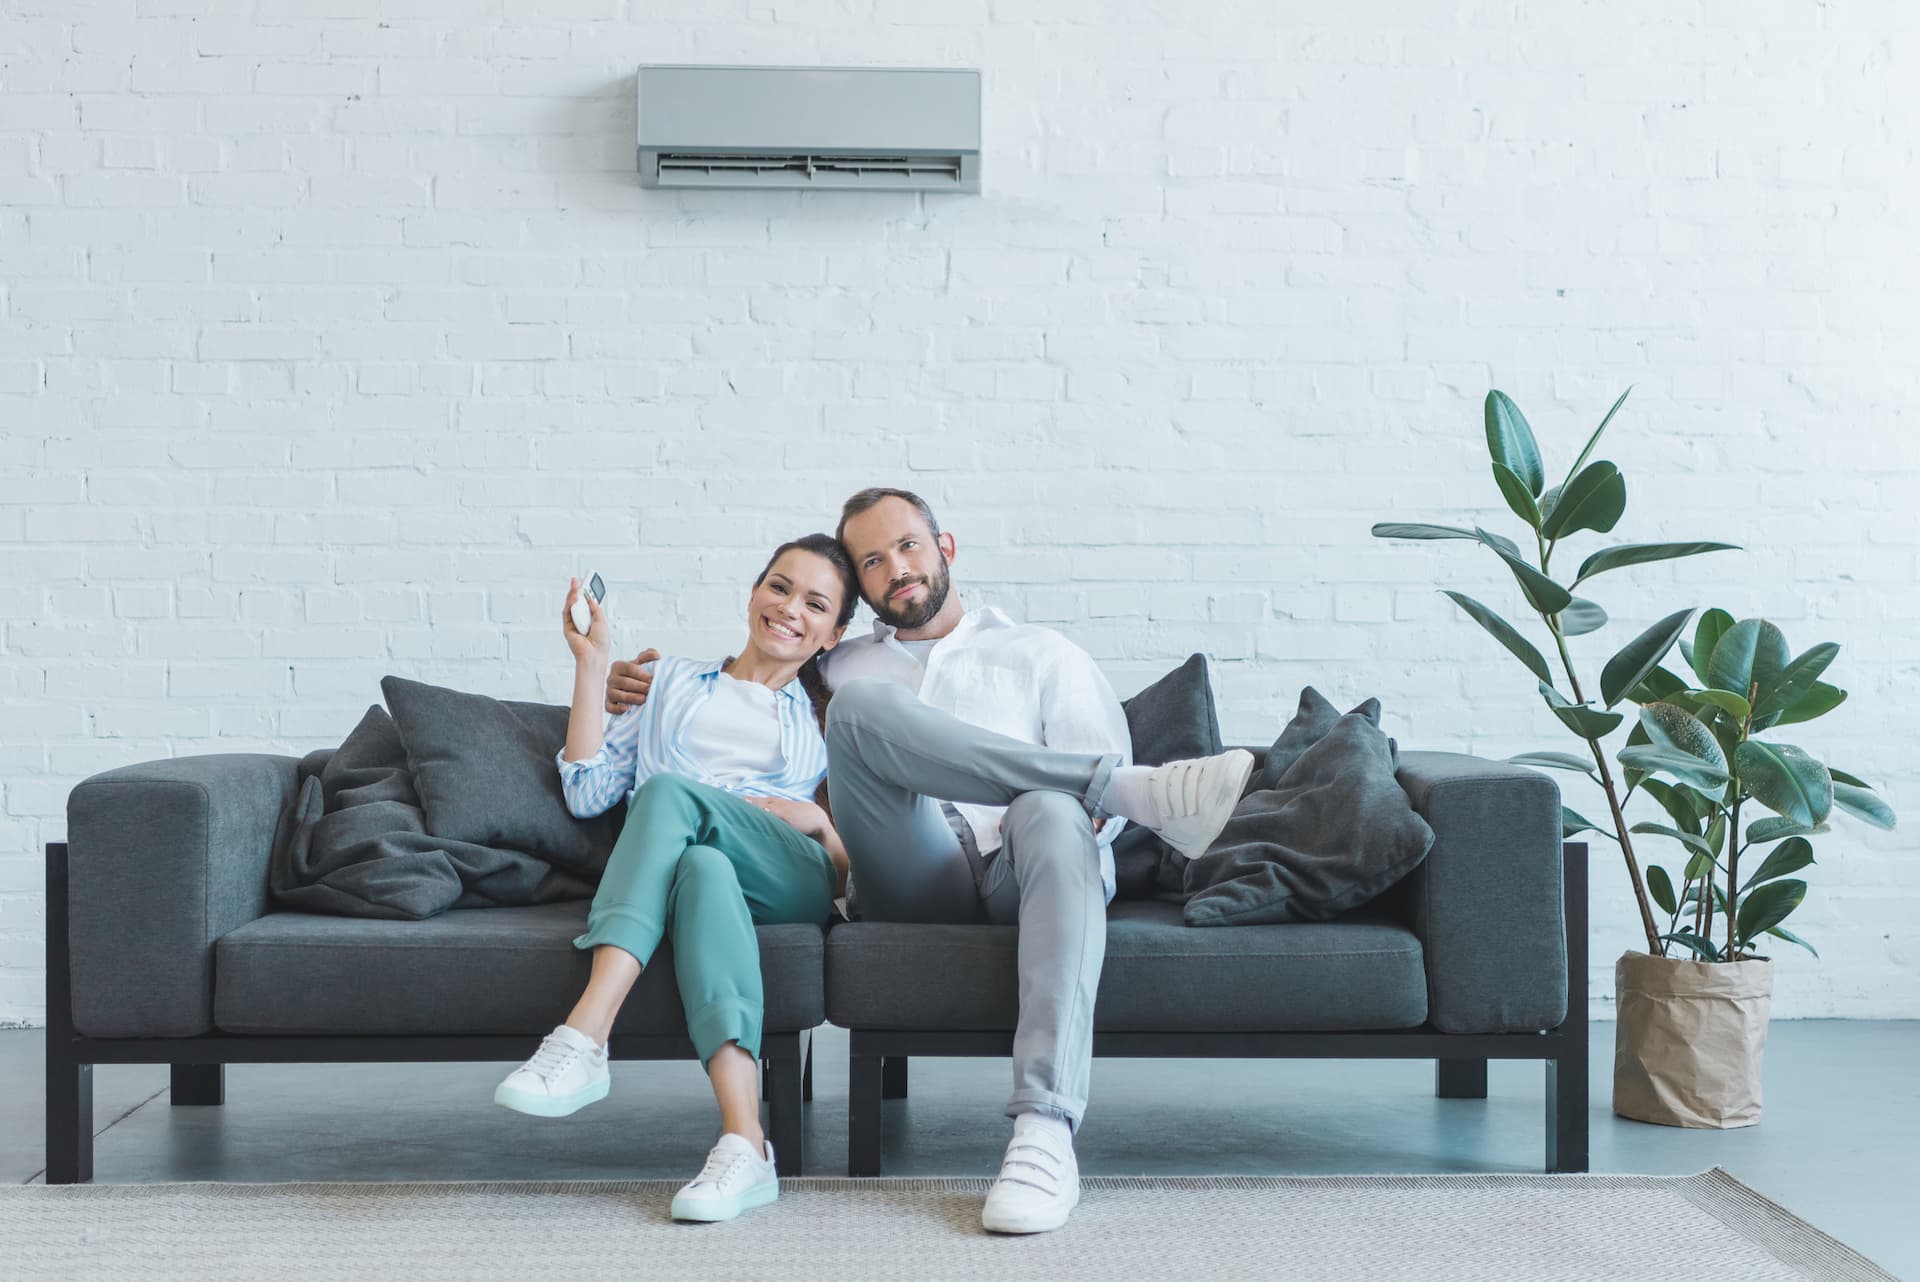 Couple in living room with wall mounted air conditioner